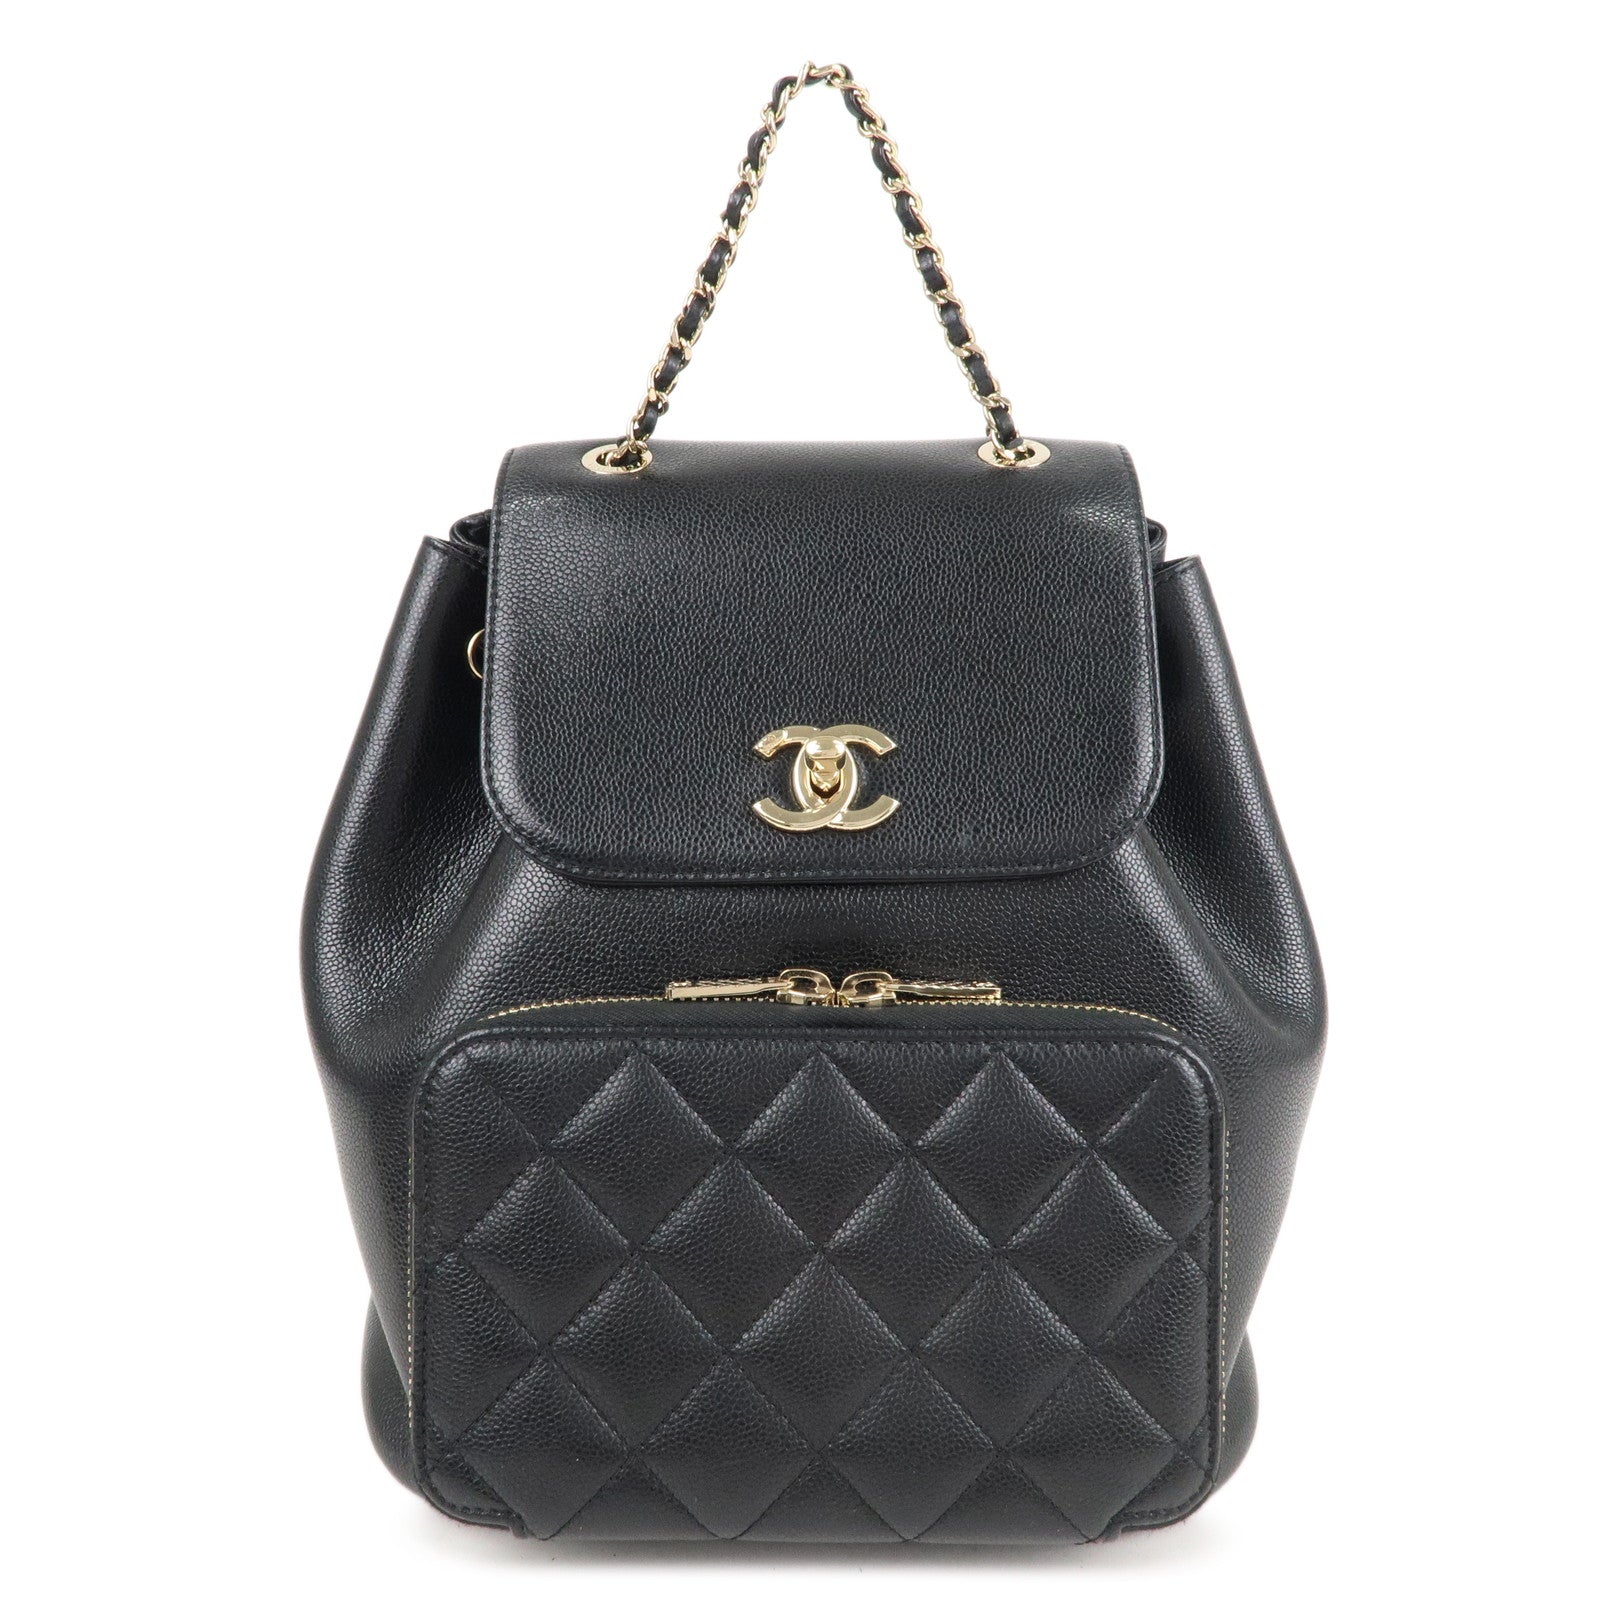 Buy Free Shipping [Used] CHANEL Chain Fake Pearl Shoulder Bag Matelasse  Leather Black AS2856 from Japan - Buy authentic Plus exclusive items from  Japan